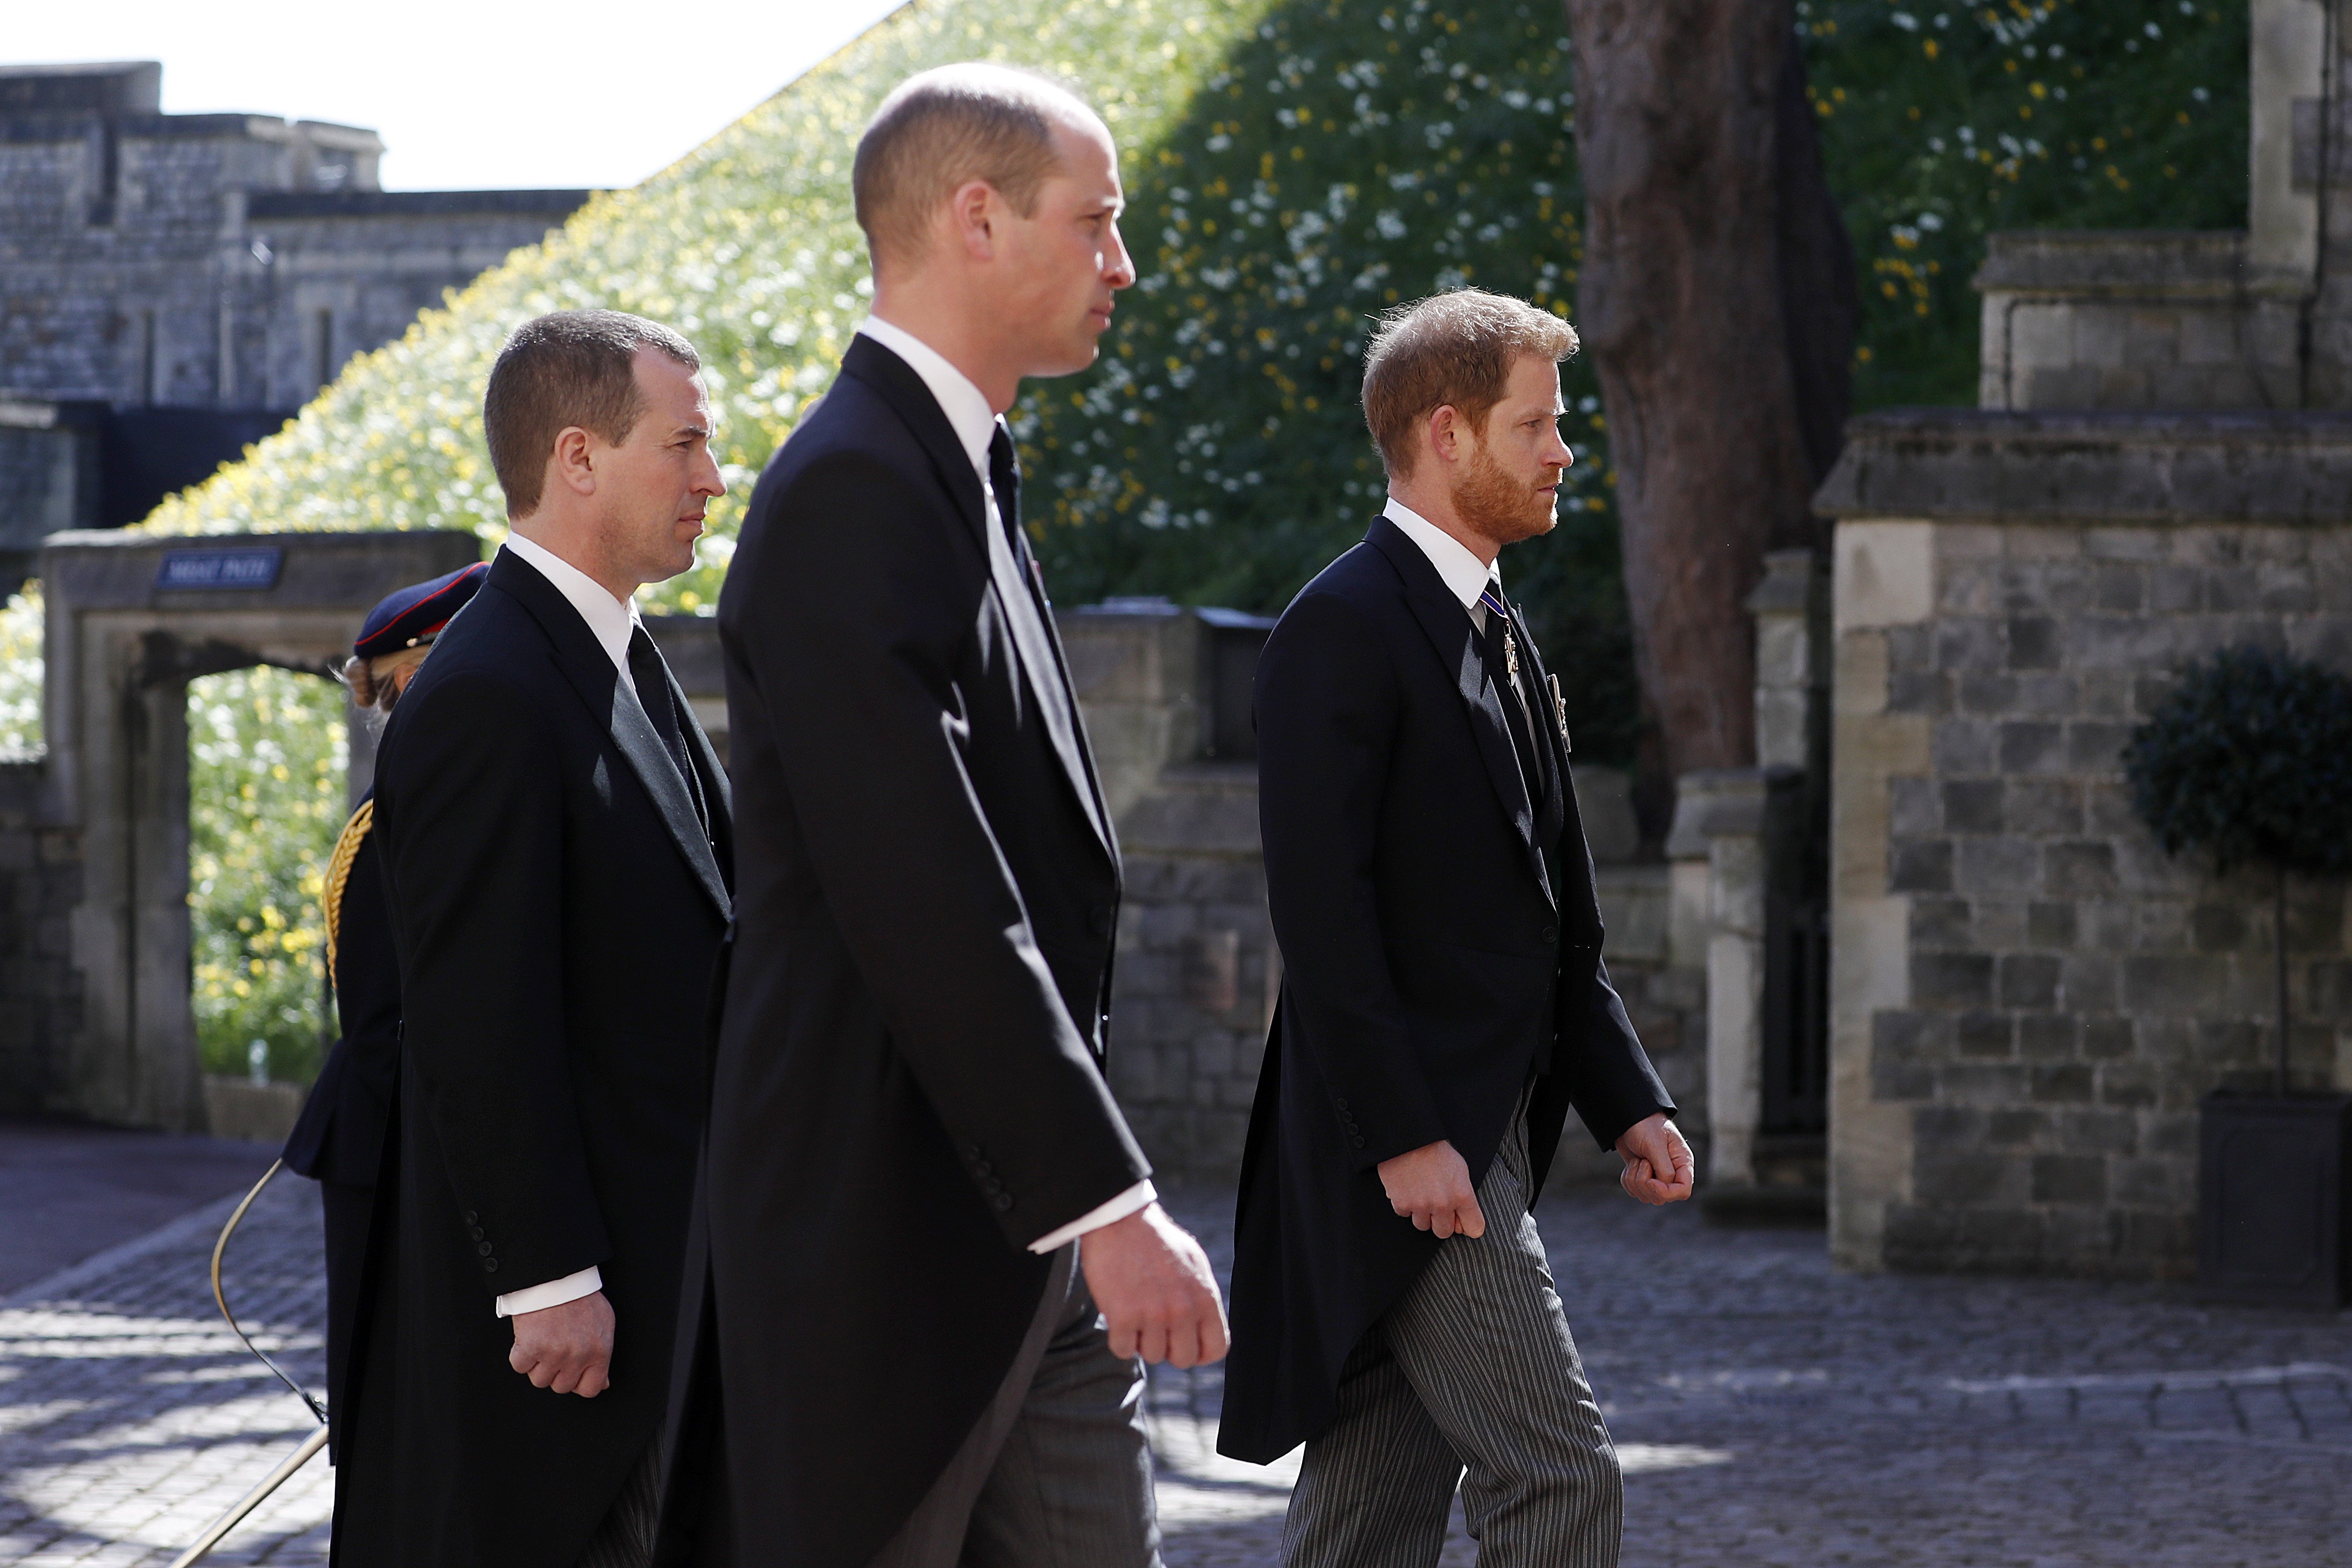  Peter Phillips, Prince William, Duke of Cambridge and Prince Harry, Duke of Sussex during the Ceremonial Procession during the funeral of Prince Philip, Duke of Edinburgh at Windsor Castle on April 17, 2021 in Windsor, England | Source: Getty Images 